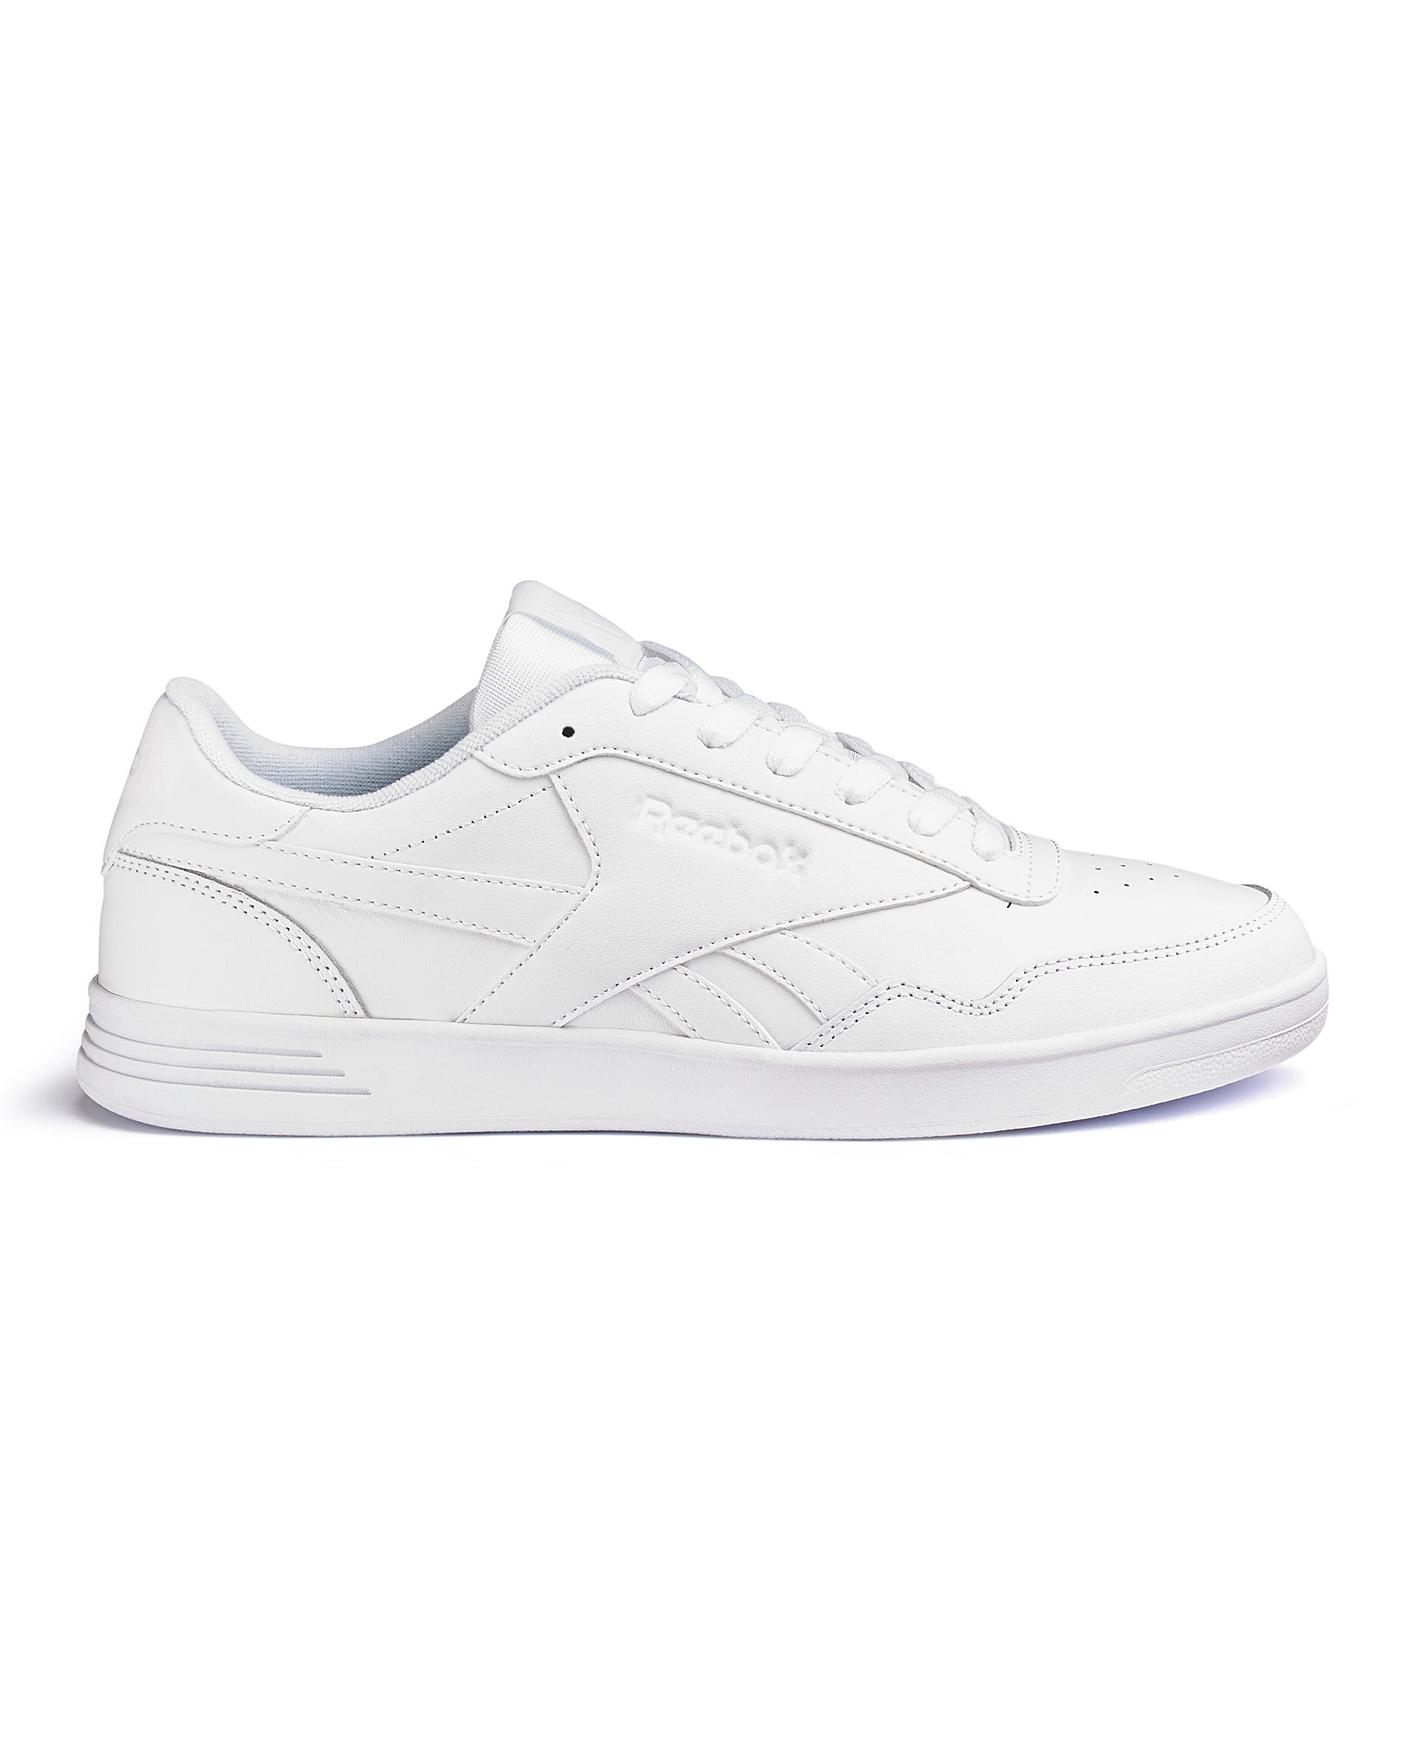 Reebok Royal Technique Trainers | Oxendales